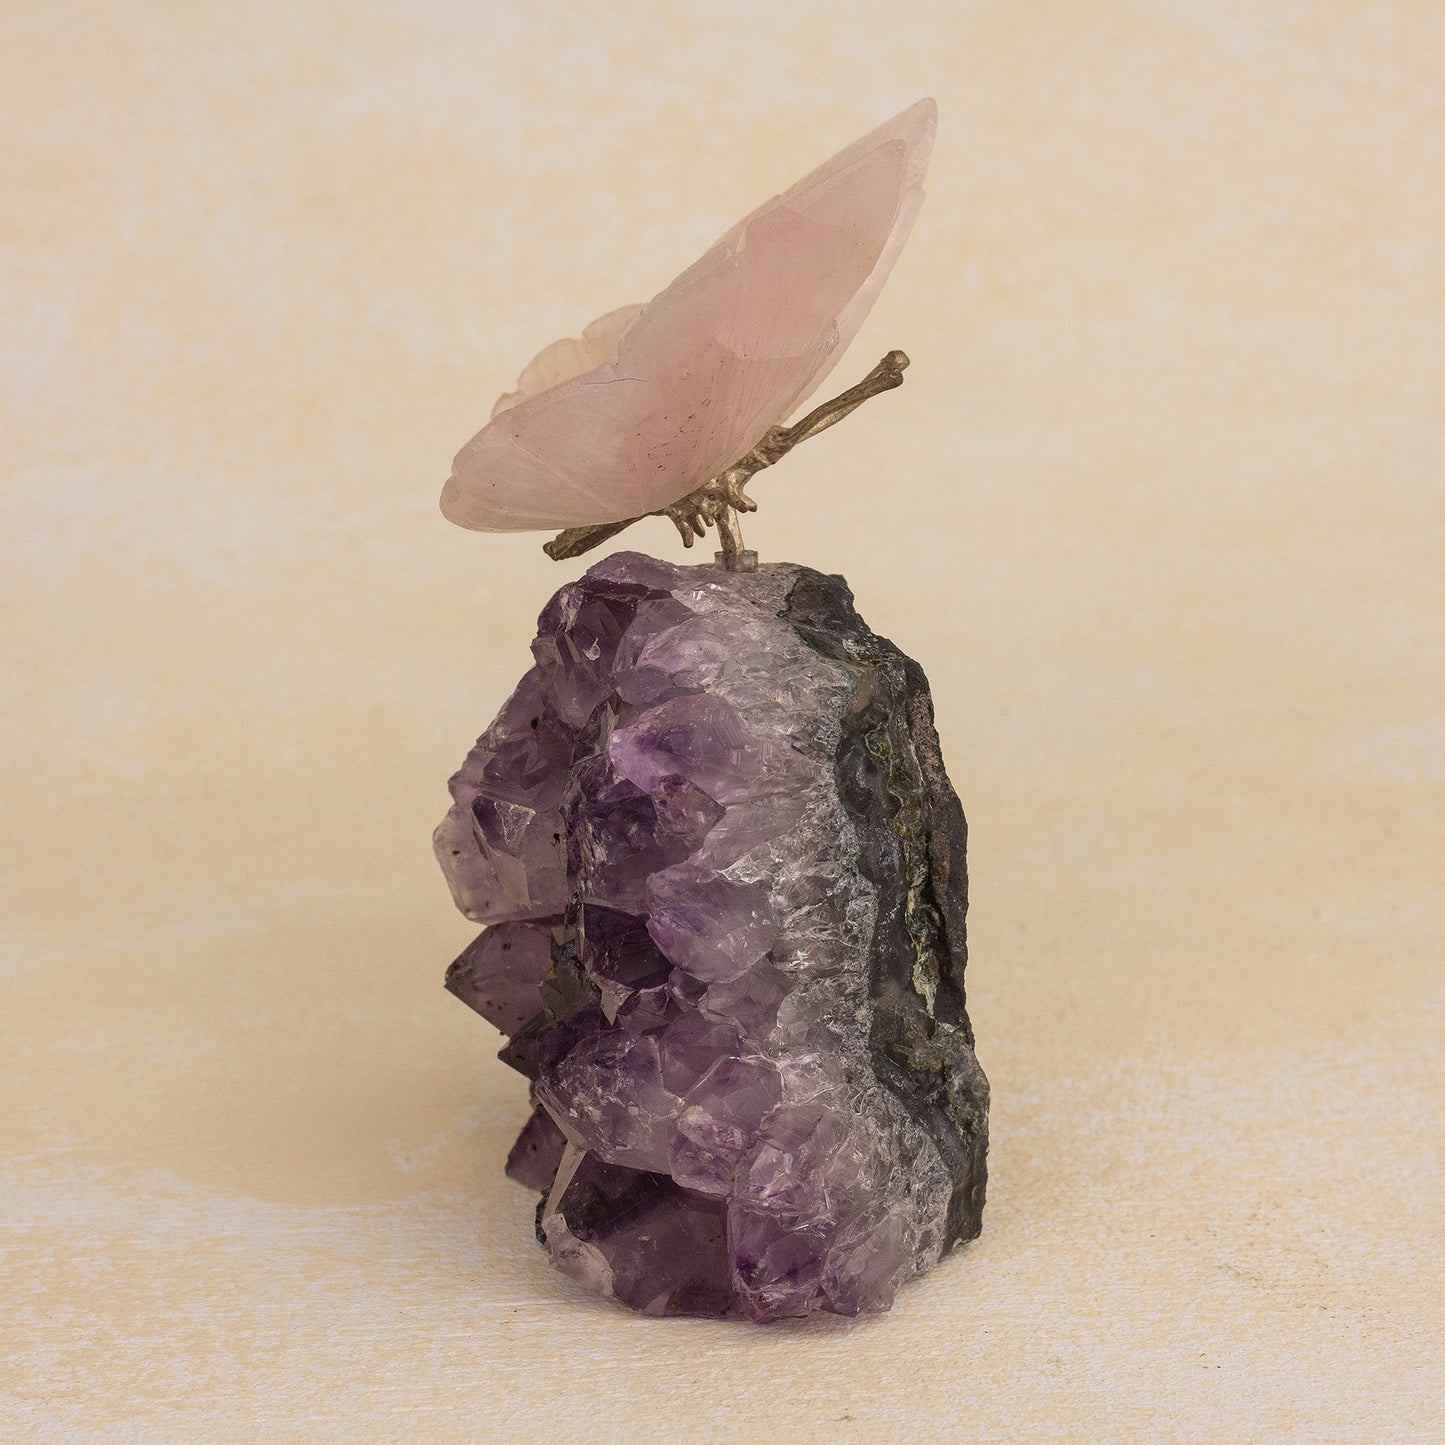 Rosy Wings Rose Quartz Butterfly on Amethyst Nugget Figurine